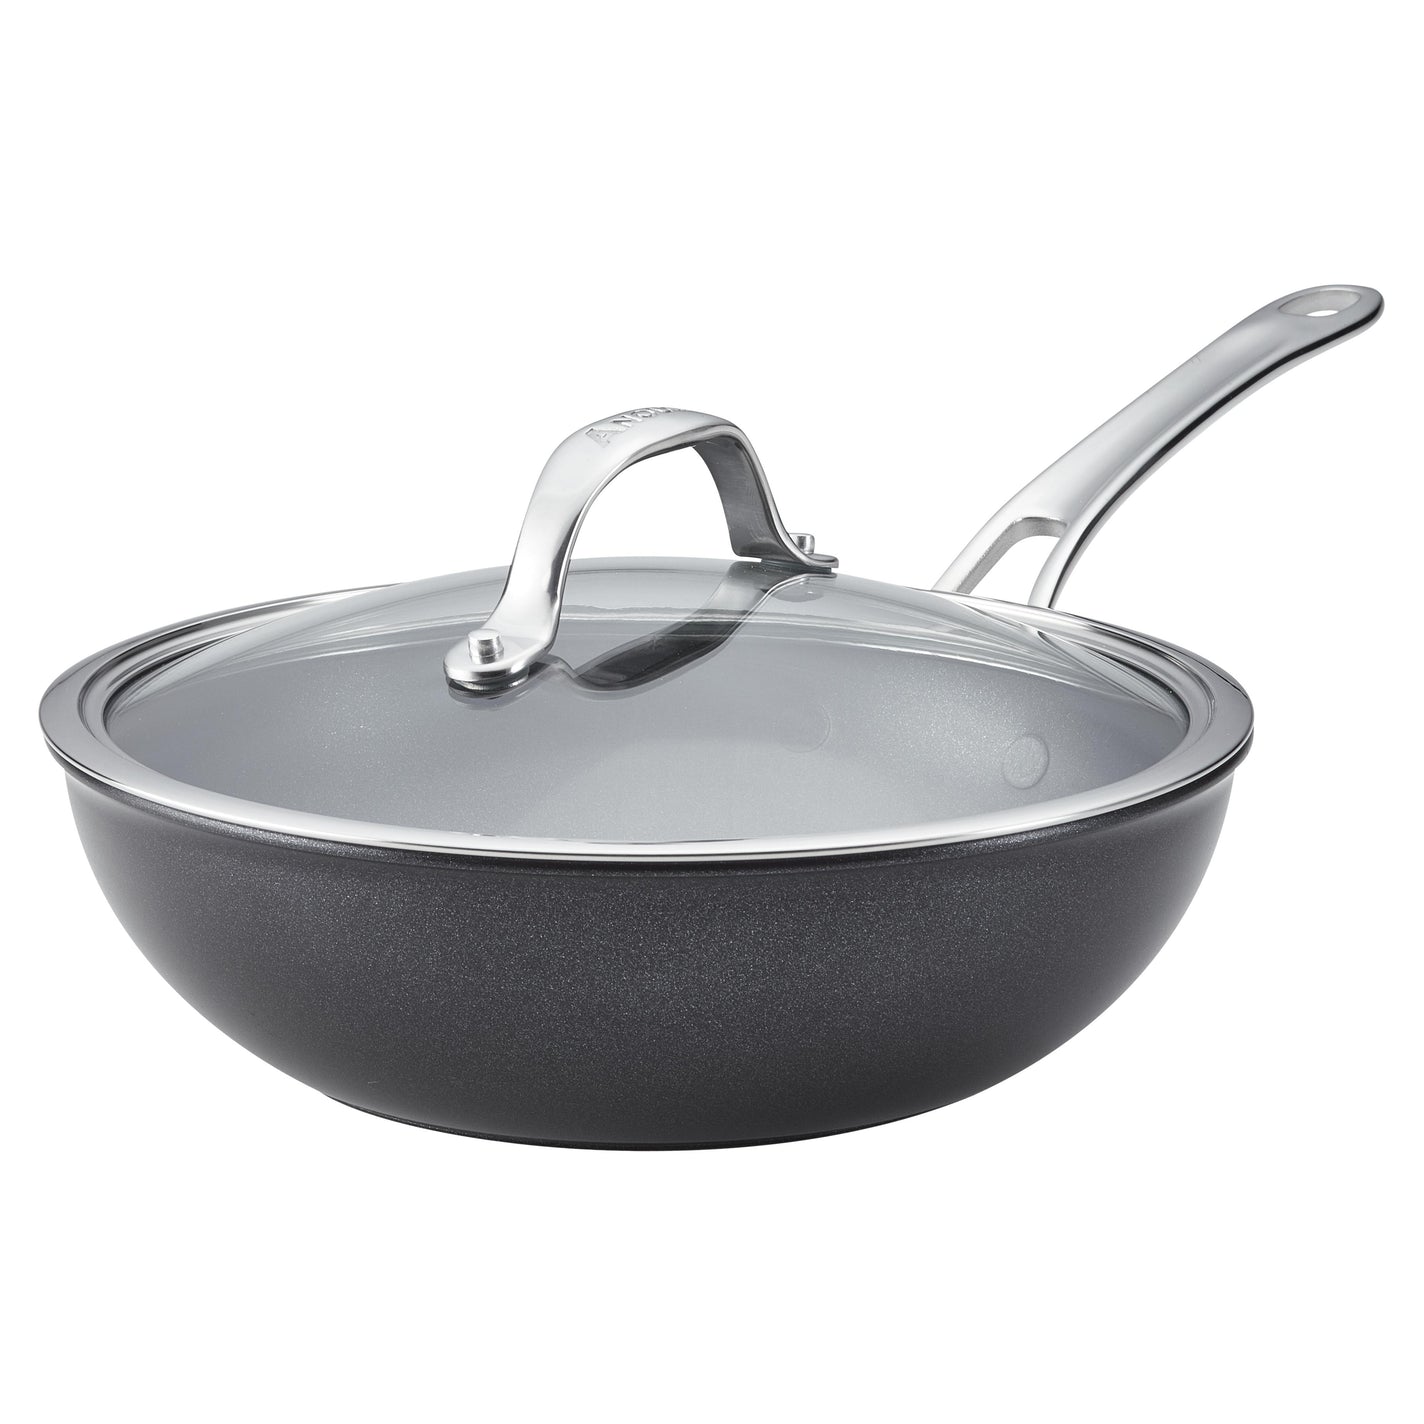 Tri-ply Stainless Steel Diamond Nonstick Frying Pan, 10 inch, 10 INCH -  Fry's Food Stores